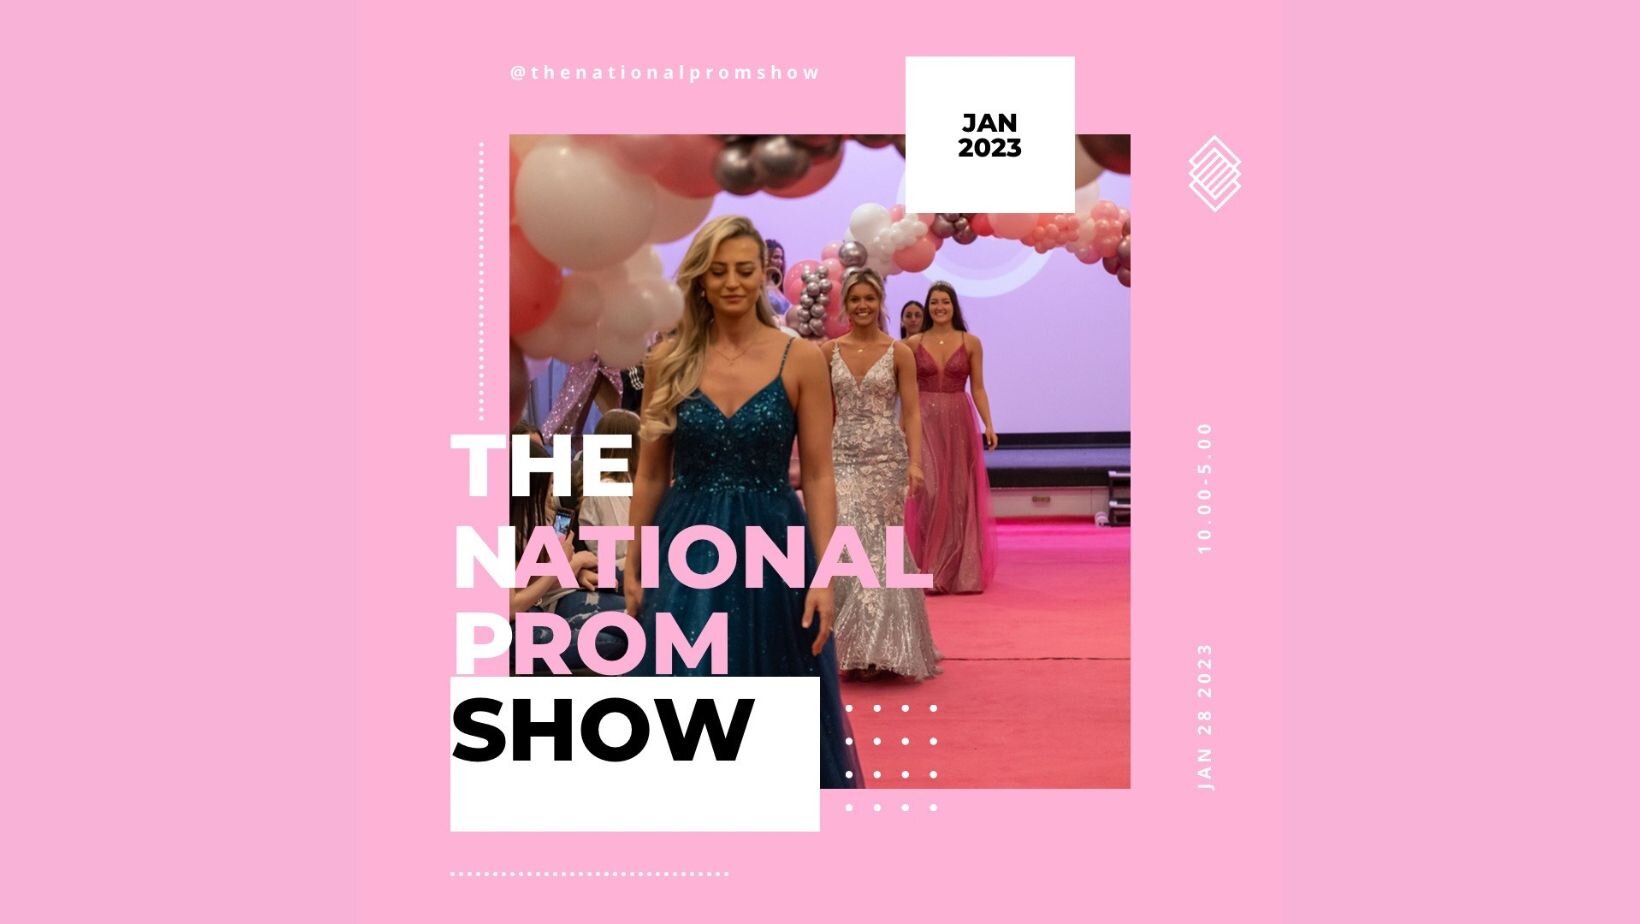 The National Prom Show